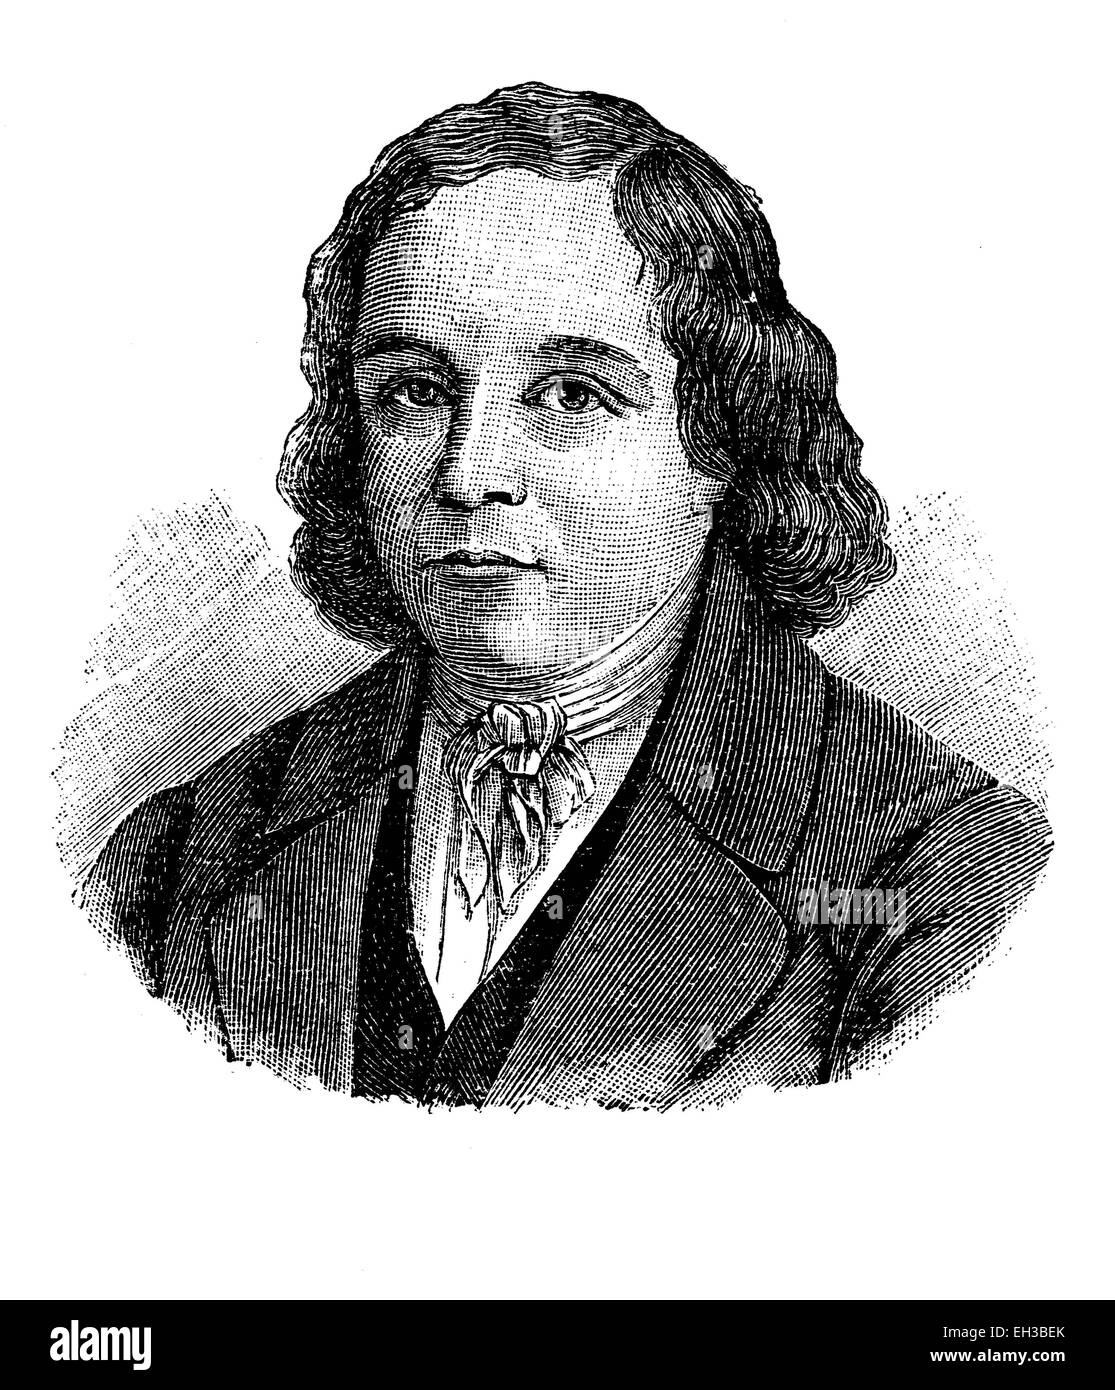 Johann Georg August Wirth, 1798 - 1848, a German lawyer, writer and politician, historical engraving, circa 1885 Stock Photo